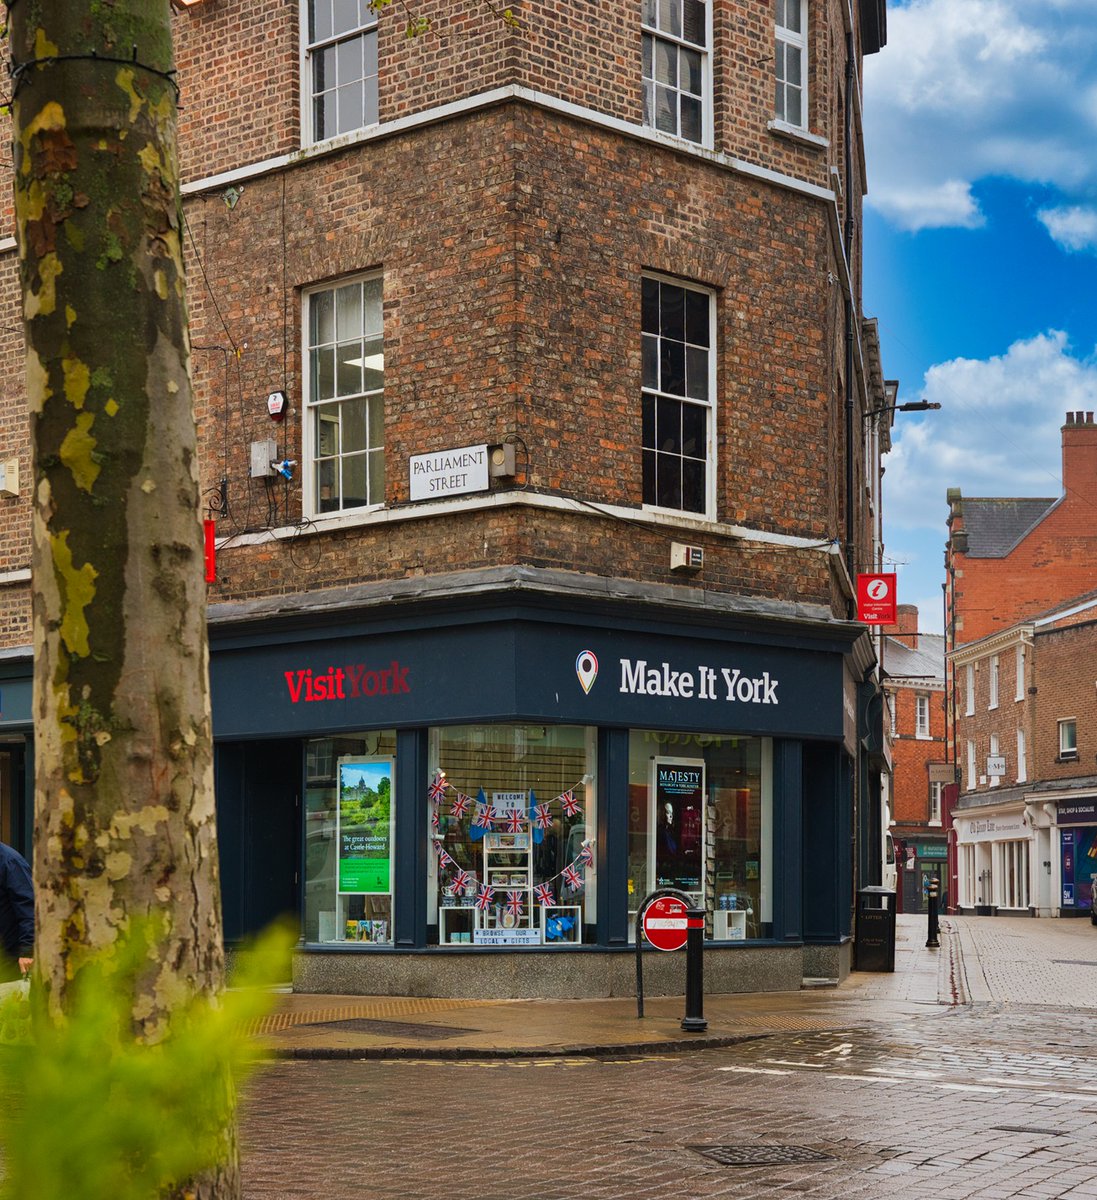 Visiting York? Drop by our Visitor Information Centre, based in the heart of the city. ❤️ Our friendly assistants are on hand with expert local knowledge on attractions, travel information, places to eat, shops and events to help plan your trip. visityork.org/vic